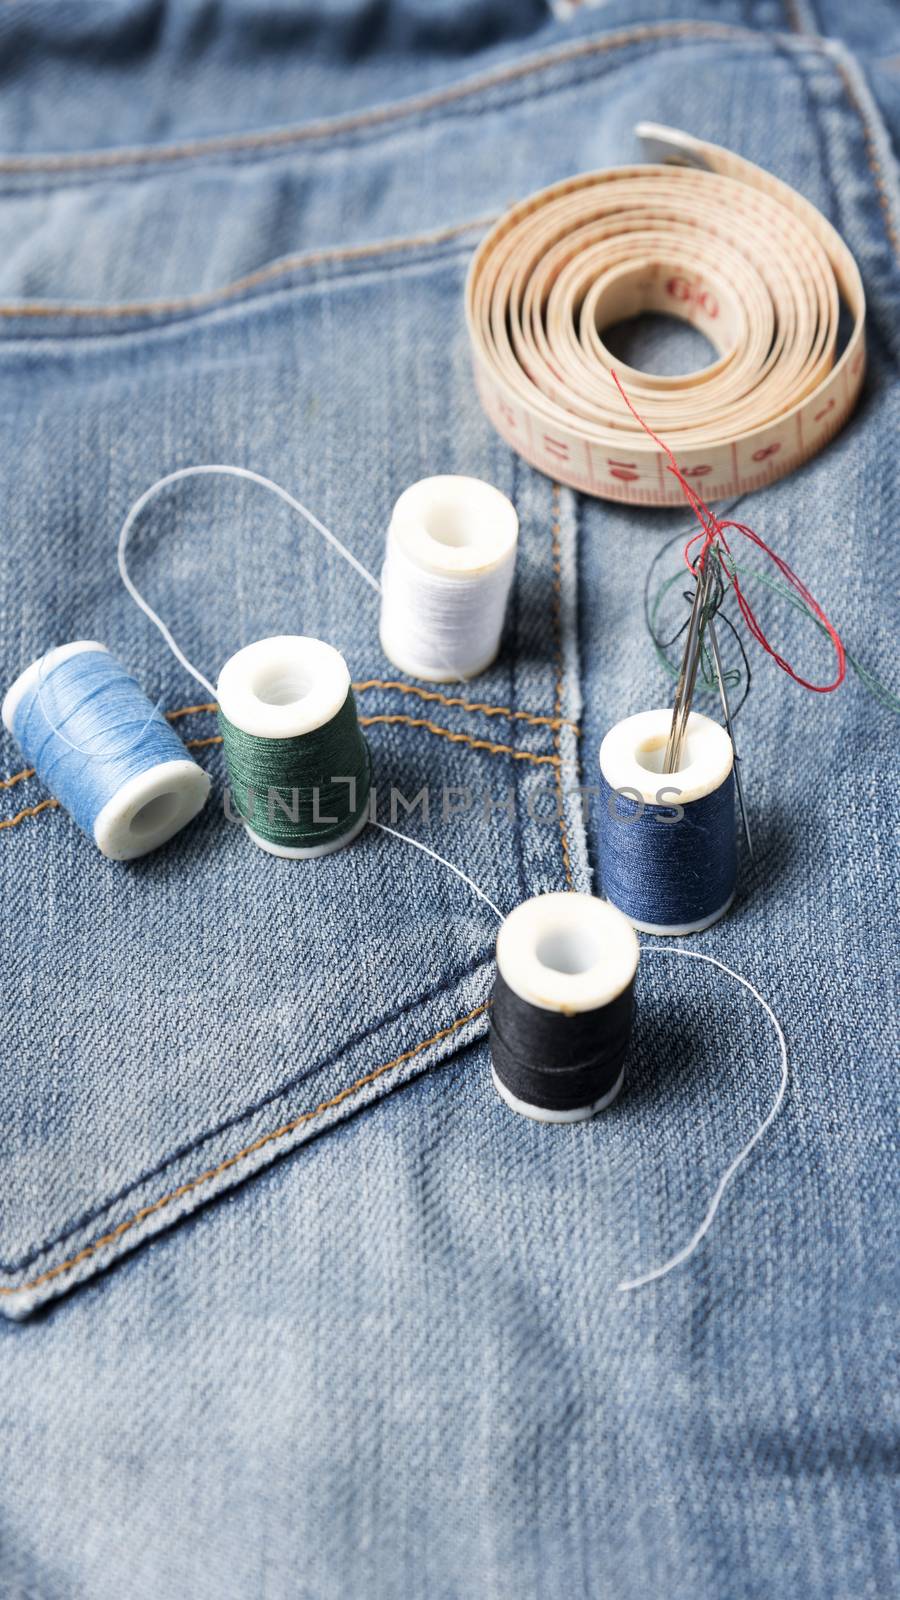 jean pants and sewing